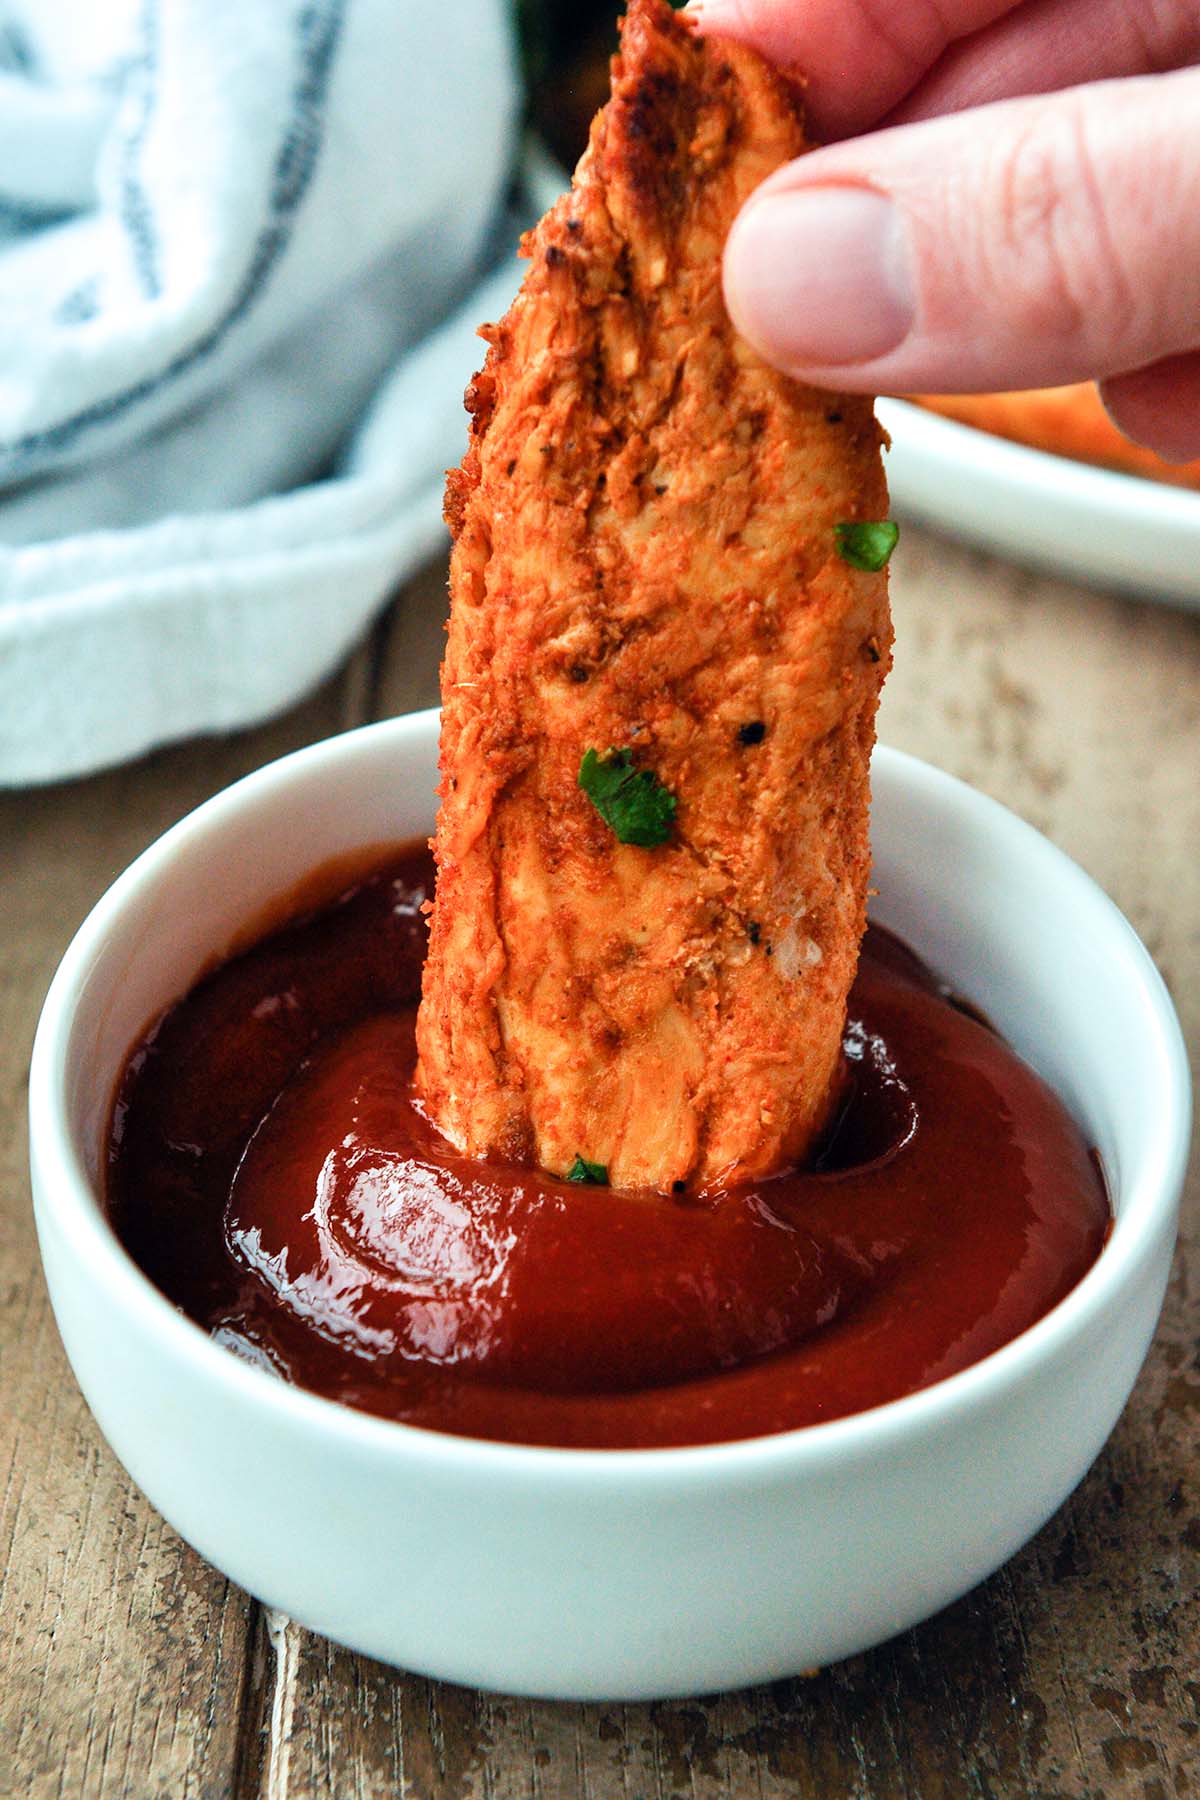 A cooked chicken tender being dipped in ketchup.